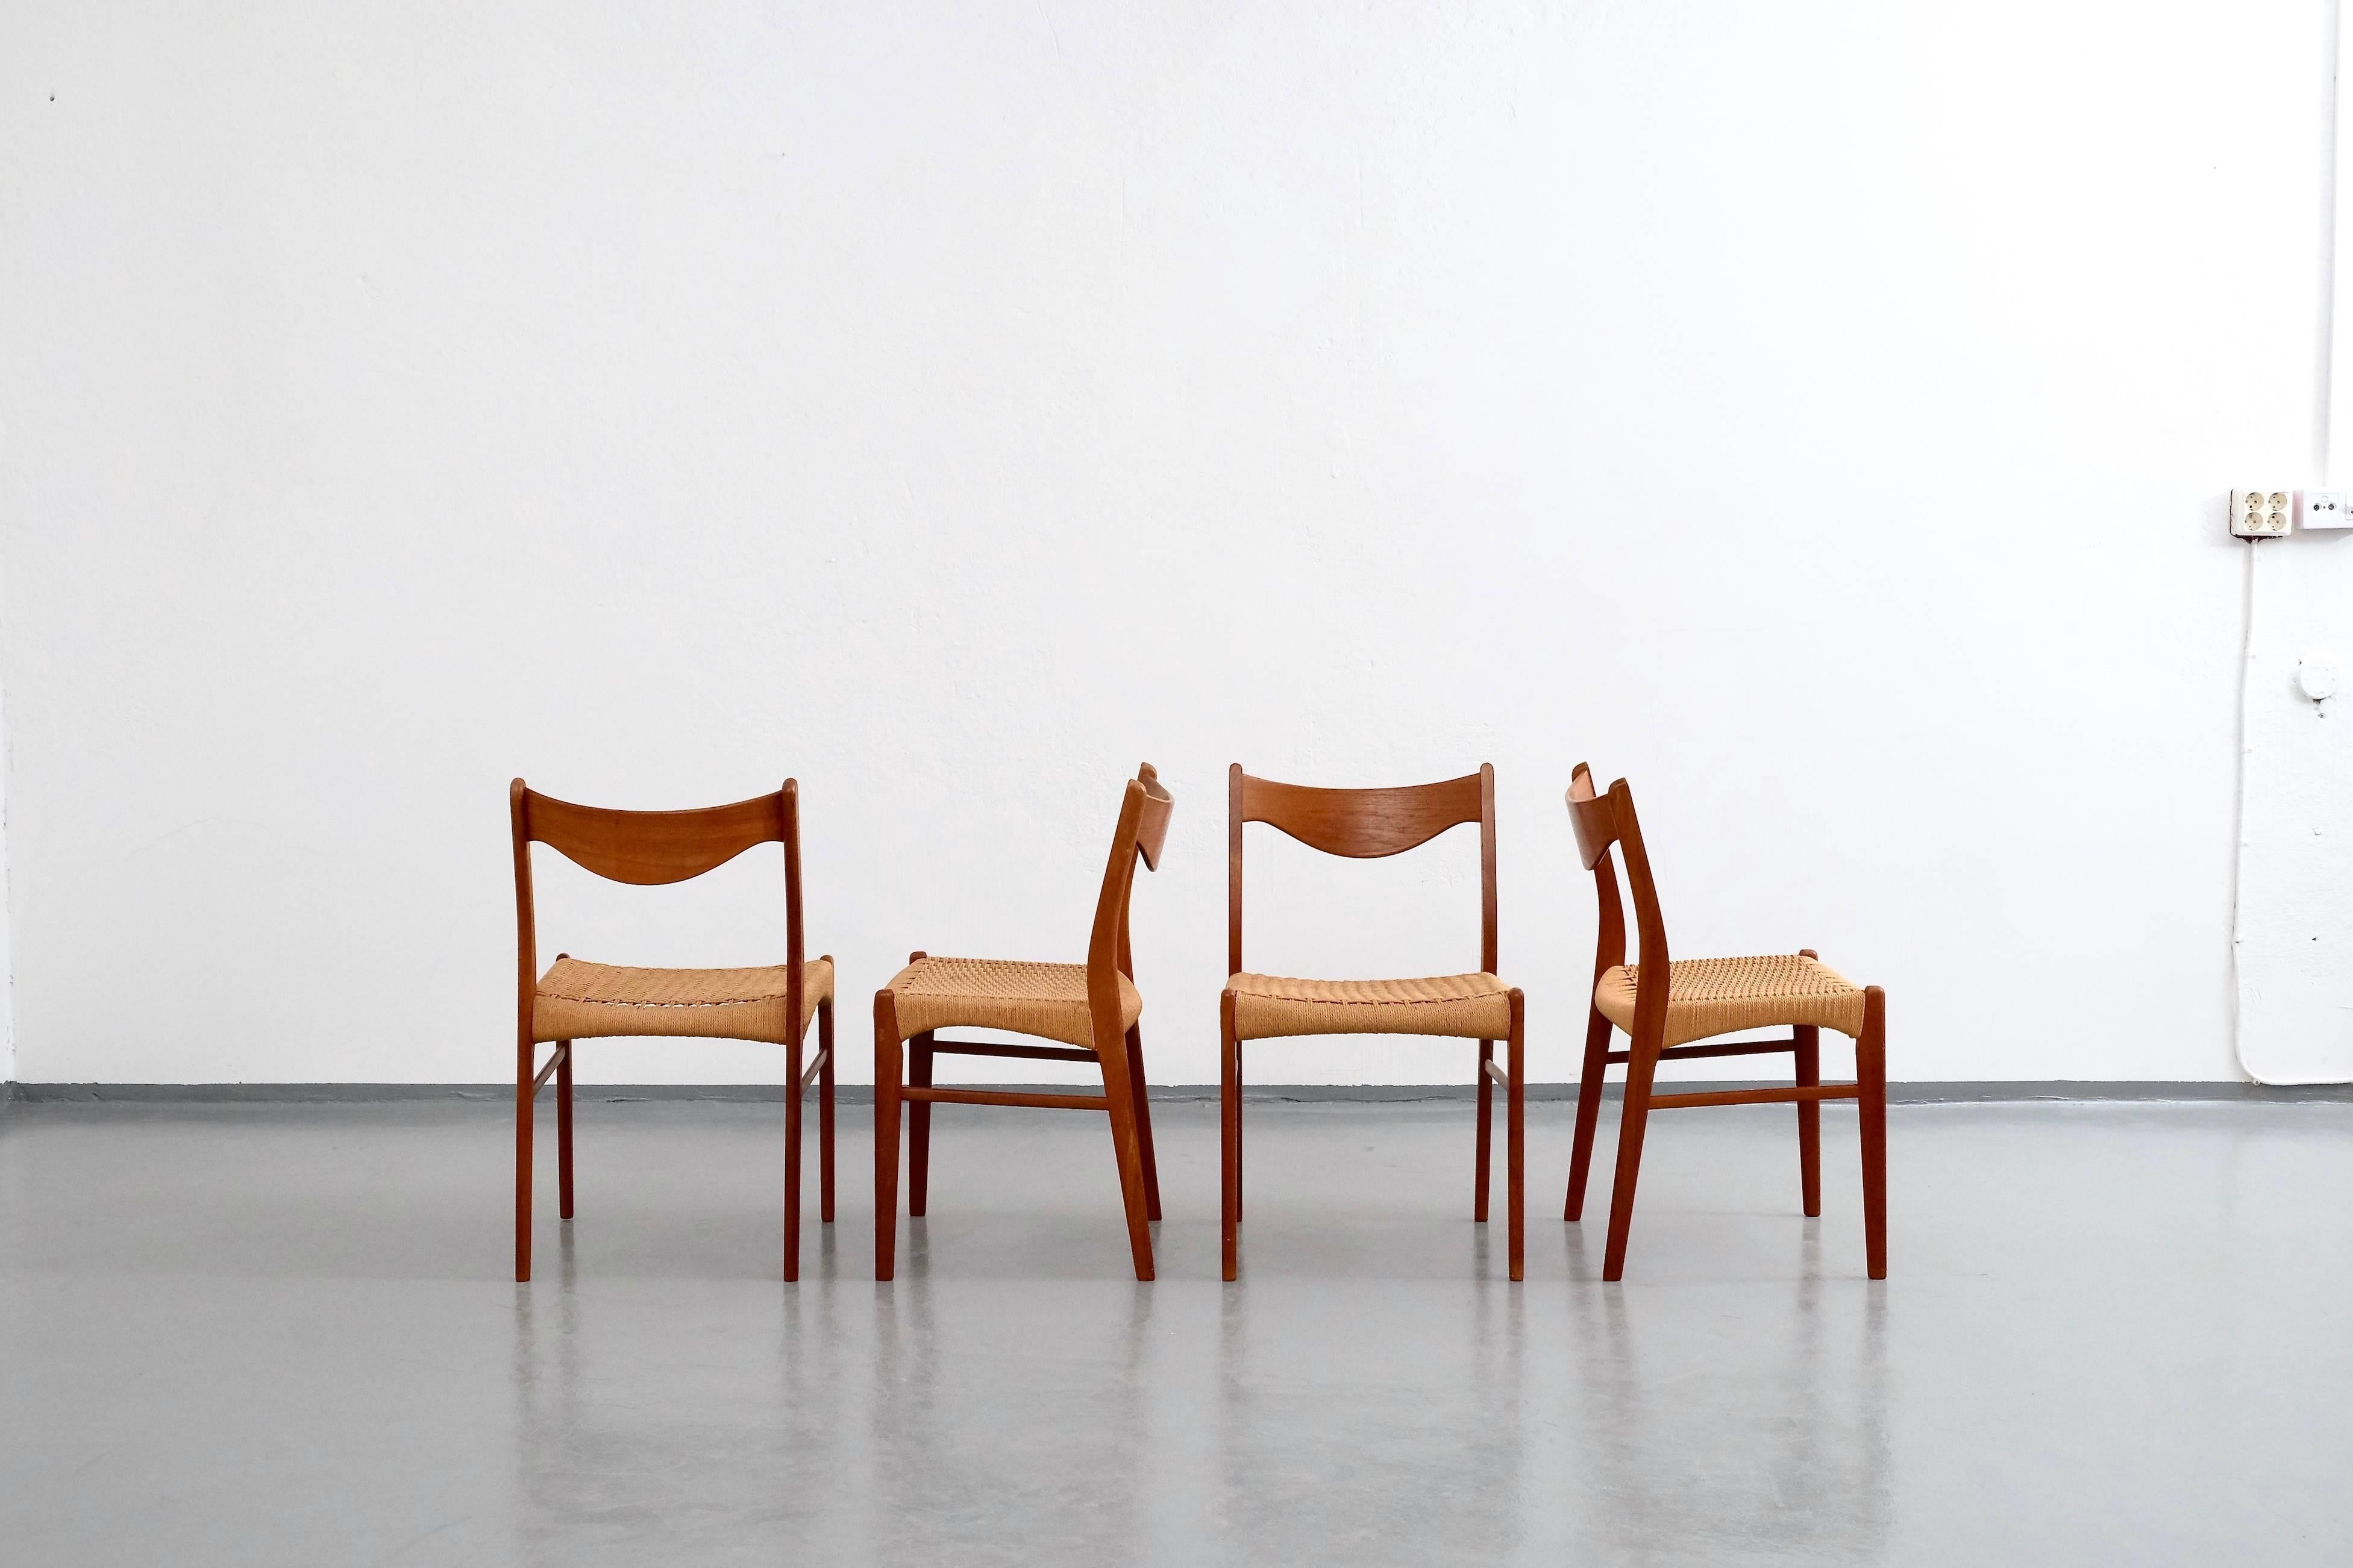 Set of four dining chairs in teak and paper cord, designed by Ejner Larsen and Aksel Bender Madsen and produced by Glyngøre Stolefabrik in the 1960s.